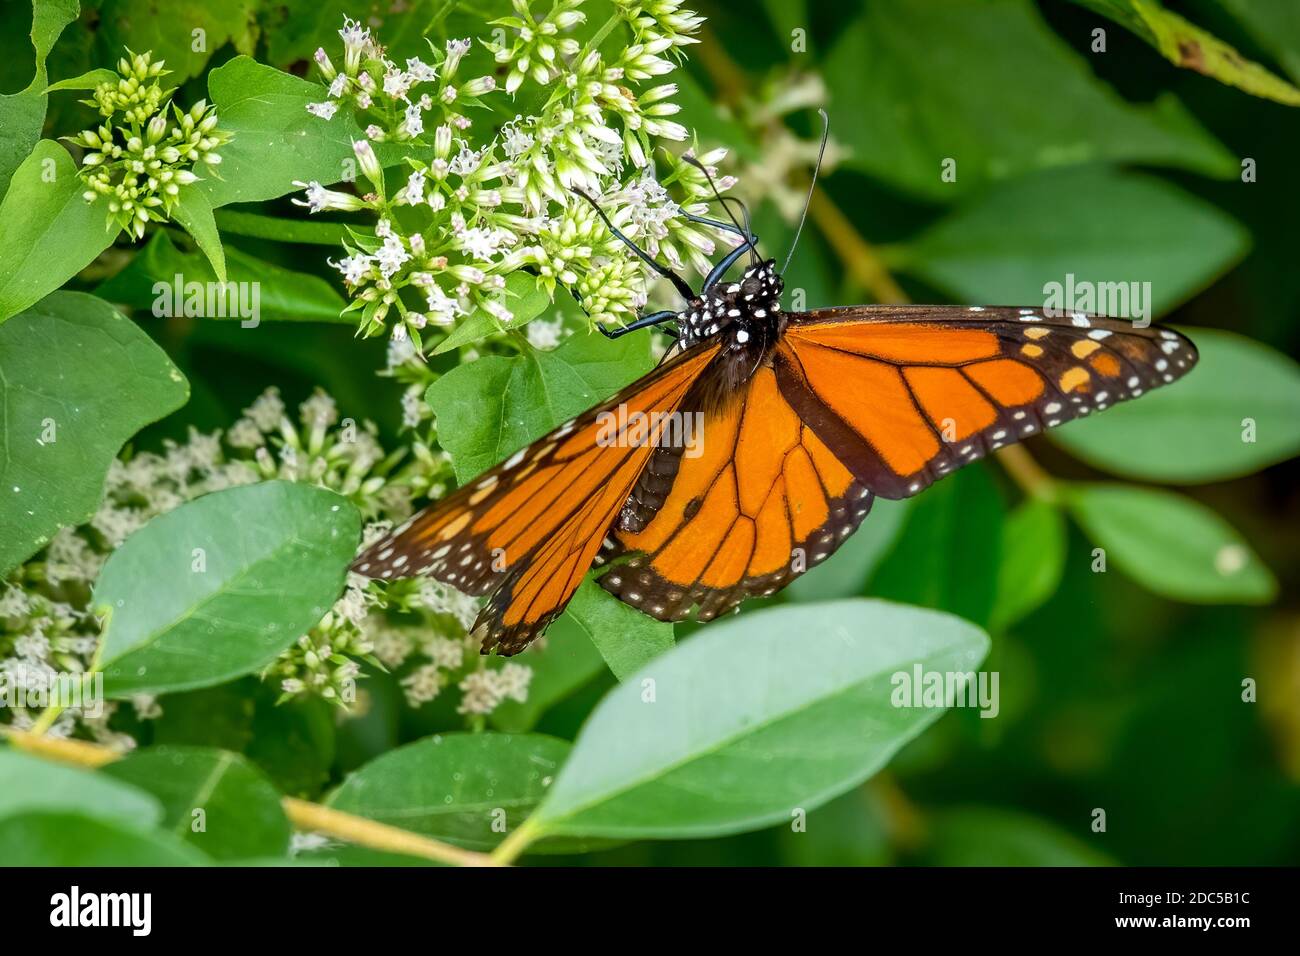 A Male Monarch (Danaus plexippus) takes in nectar from tiny white blooms of a Climbing Hempvine (Mikania scandens). Stock Photo